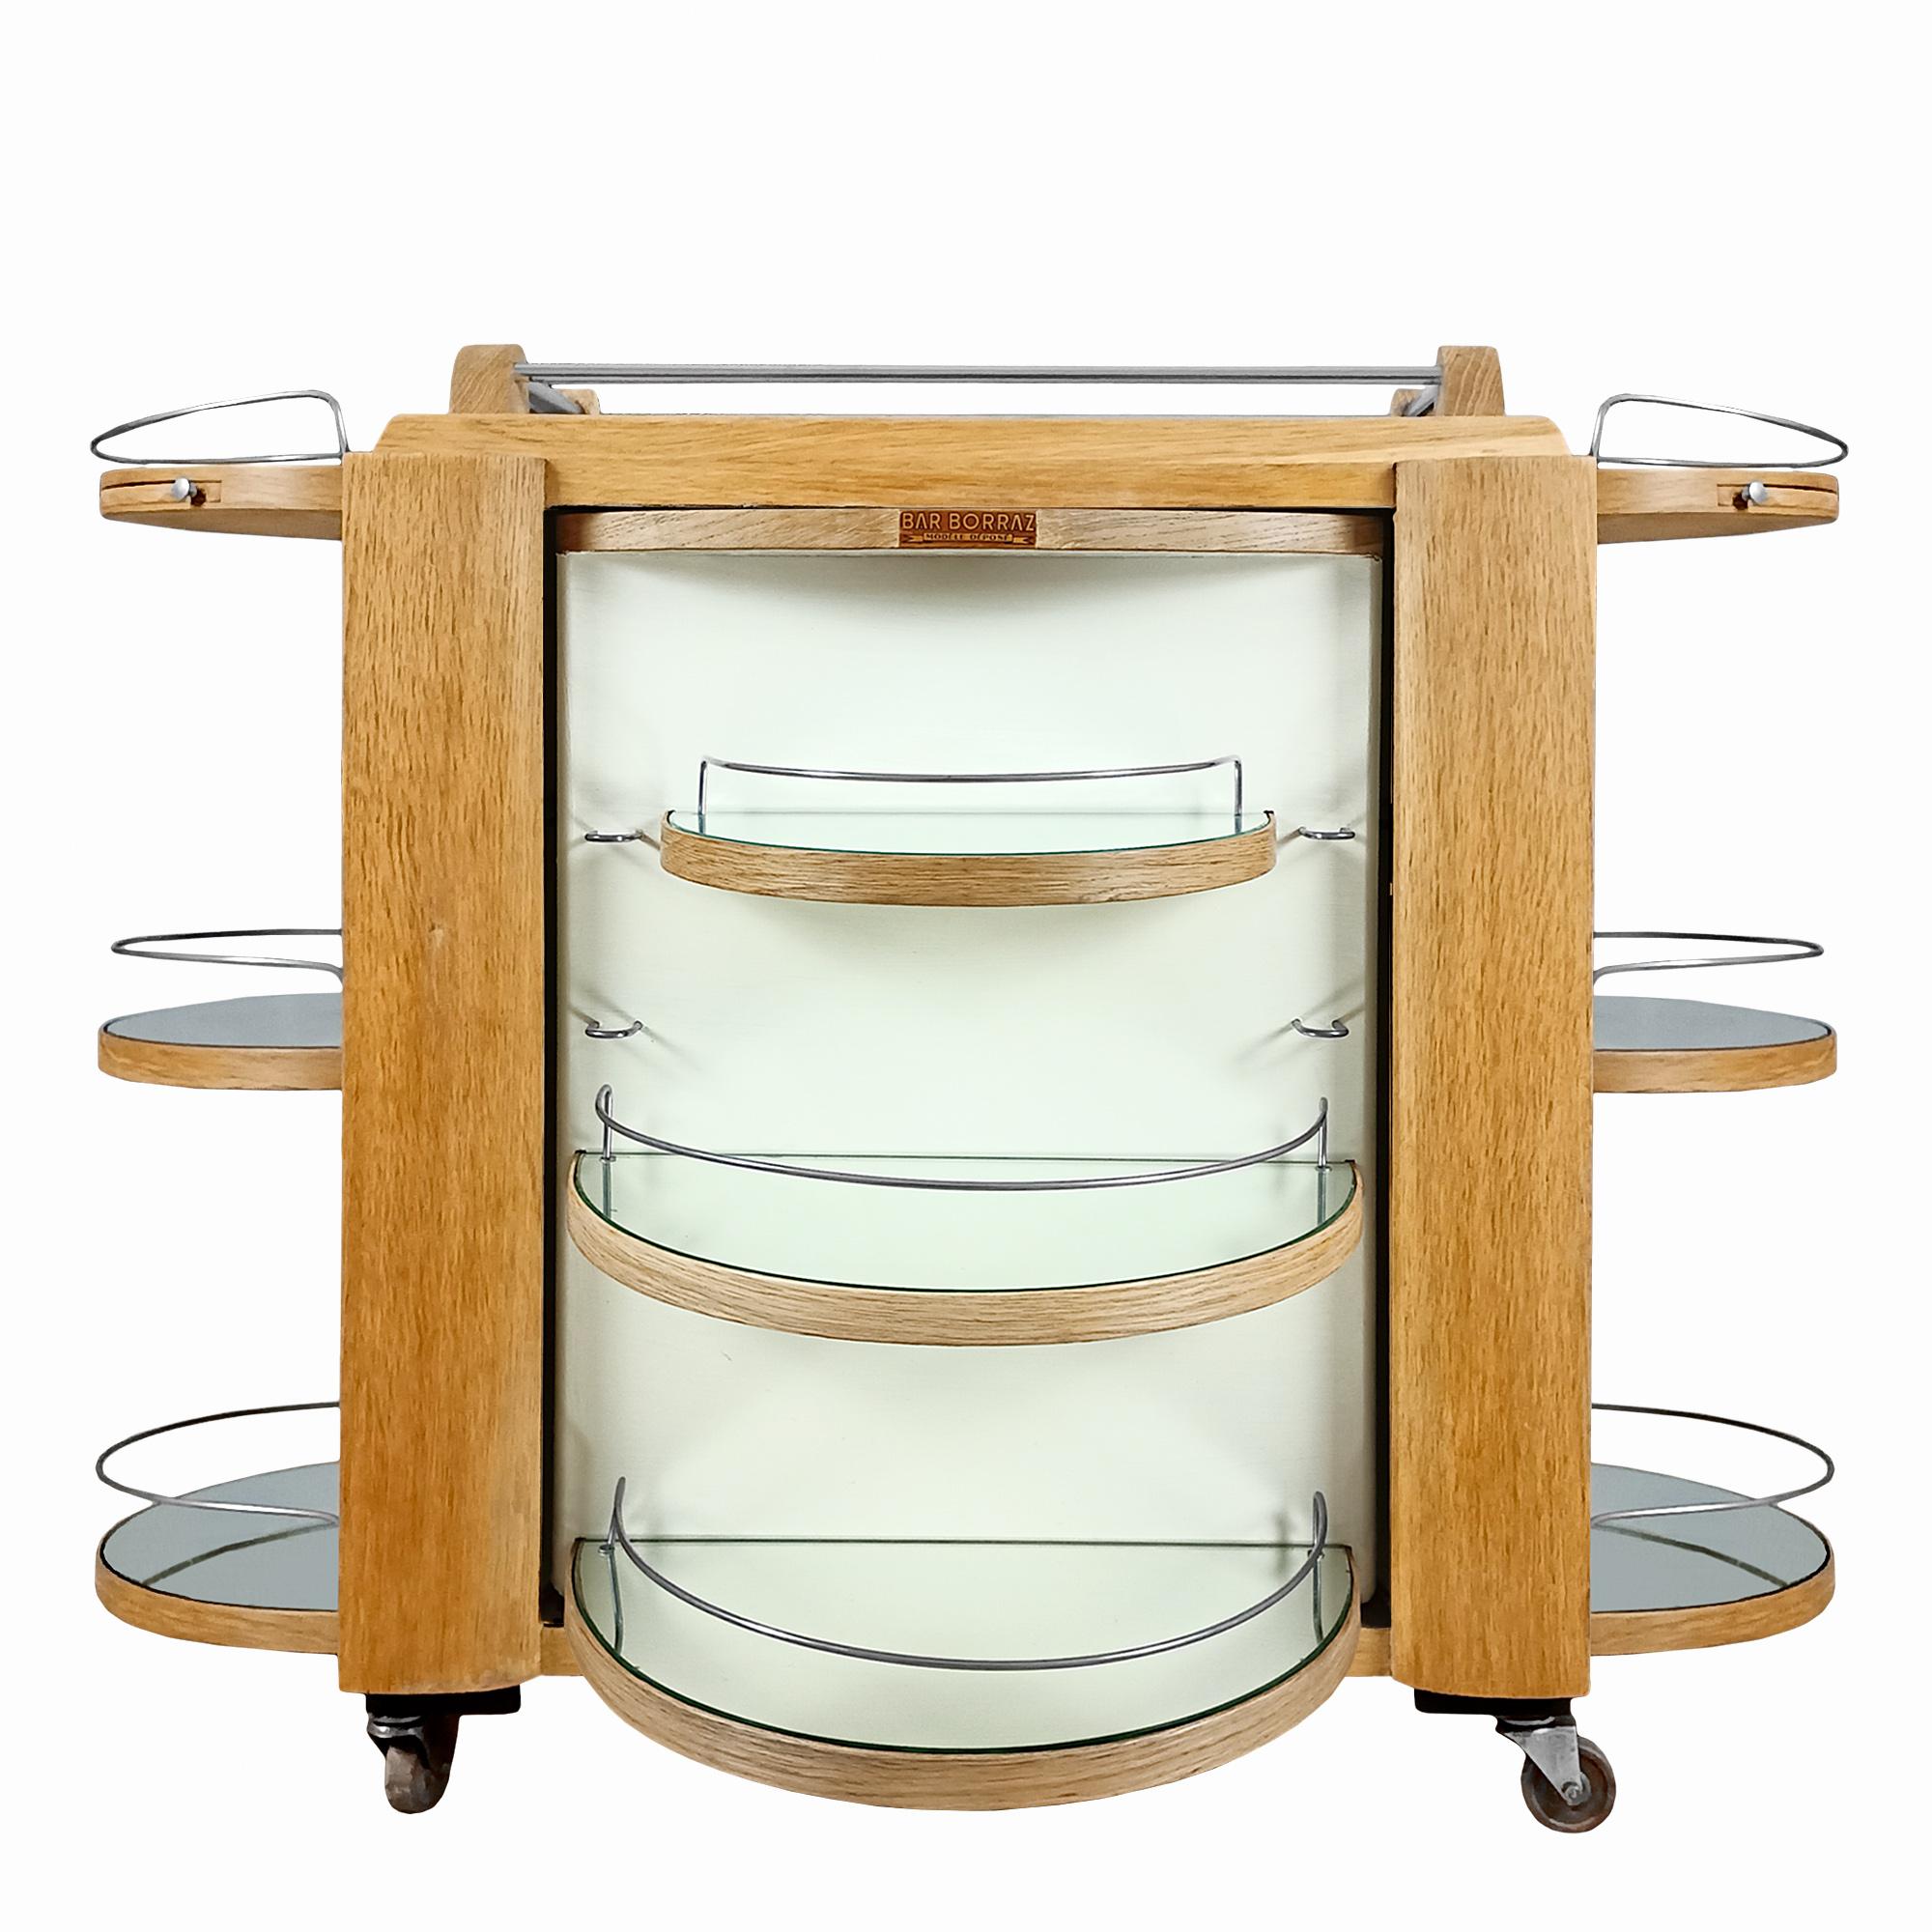 Borraz dry bar on wheels, solid oak and oak veneer, open pore finish. Pivoting door with an ivory stained space with glass and mirror shelves. Removable tray on top, two small ashtrays. Chrome plated metal hardware.

Maker’s label: Borraz registered